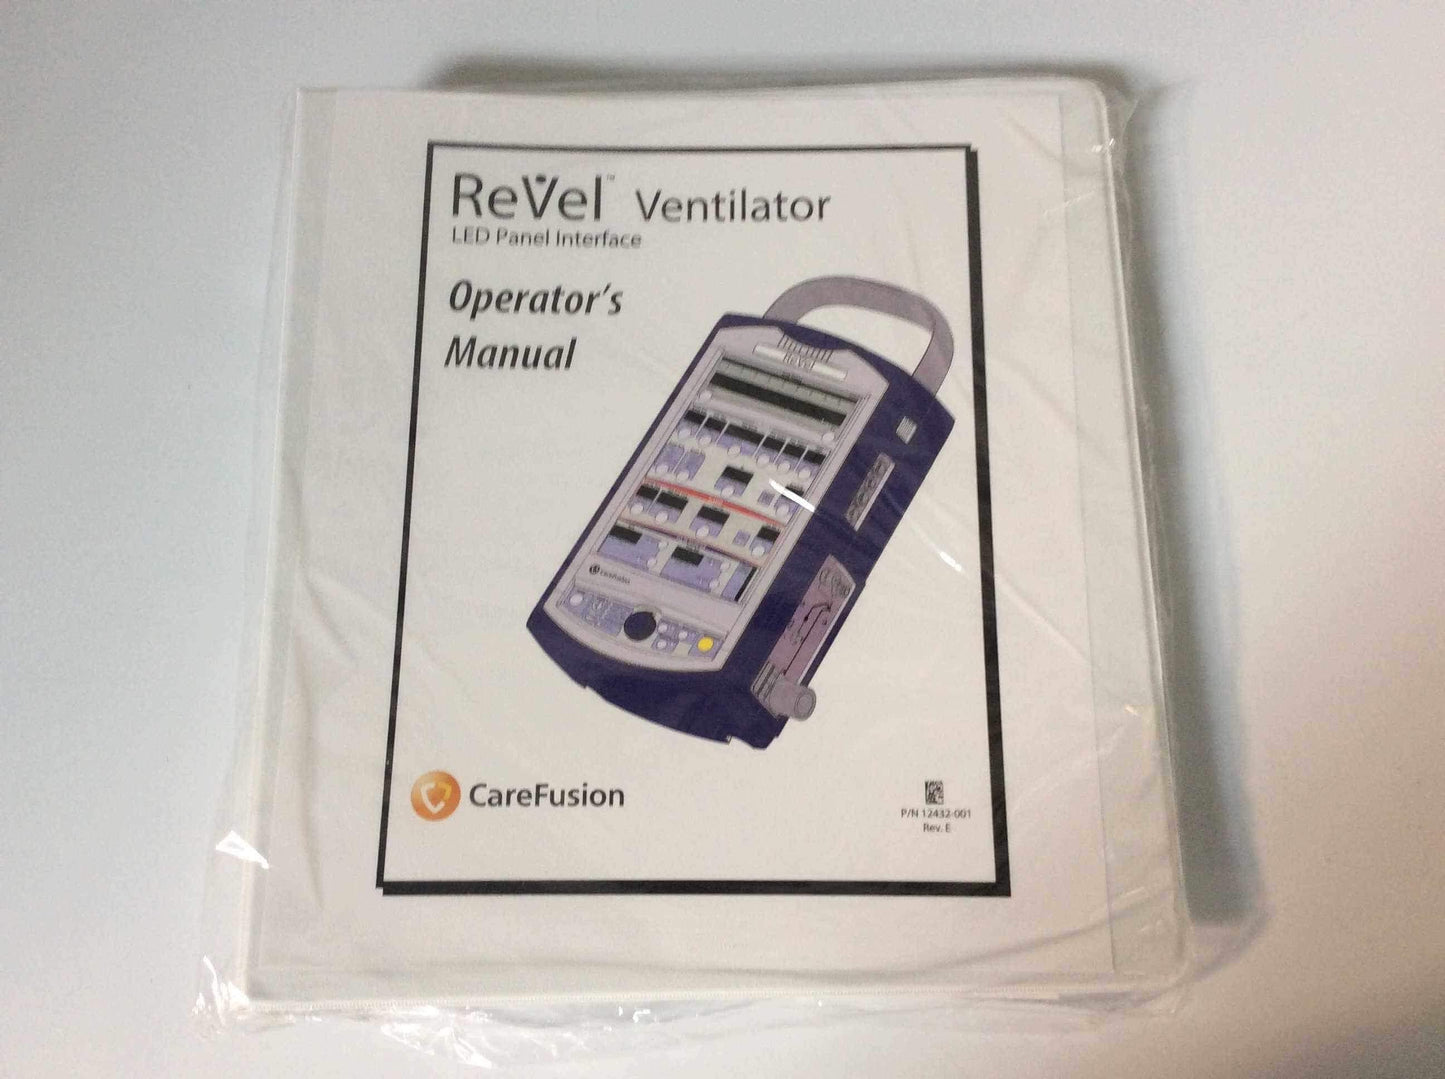 REFURBISHED Certified Patient Ready Carefusion ReVel PTV Ventilator 19260-001 with Accessories Warranty FREE Shipping - MBR Medicals